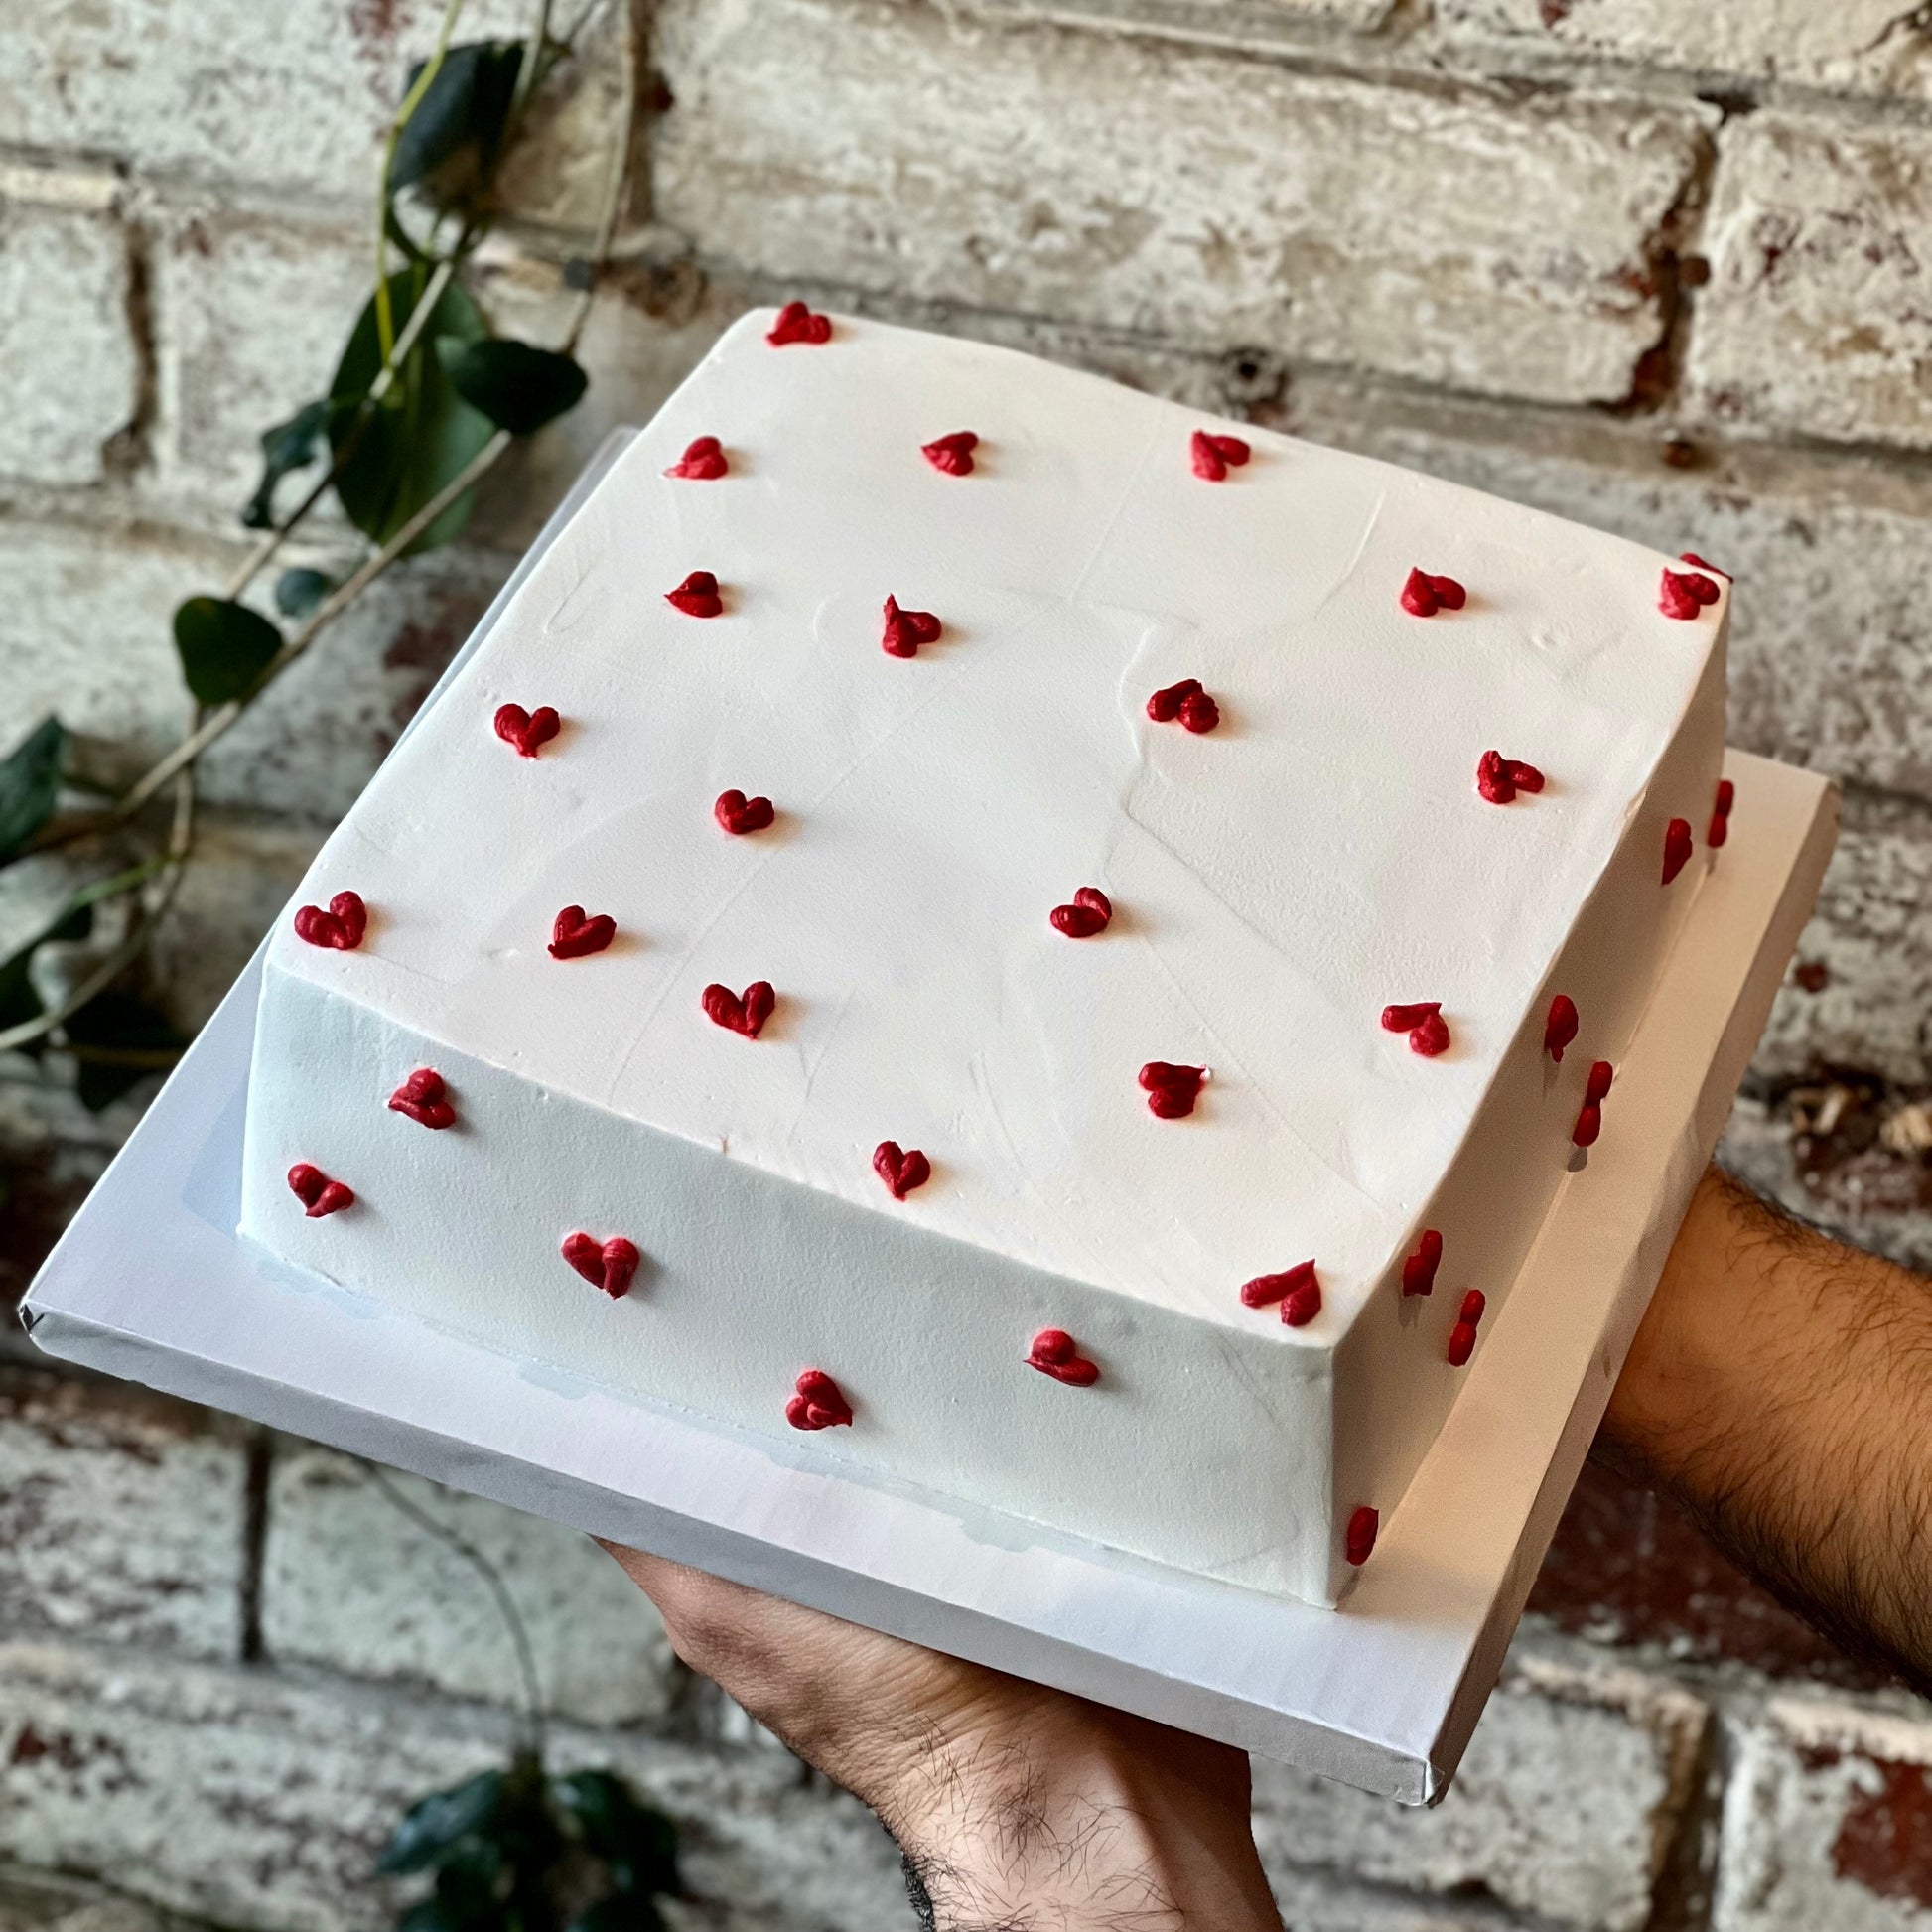 Square white cake tiny red hearts